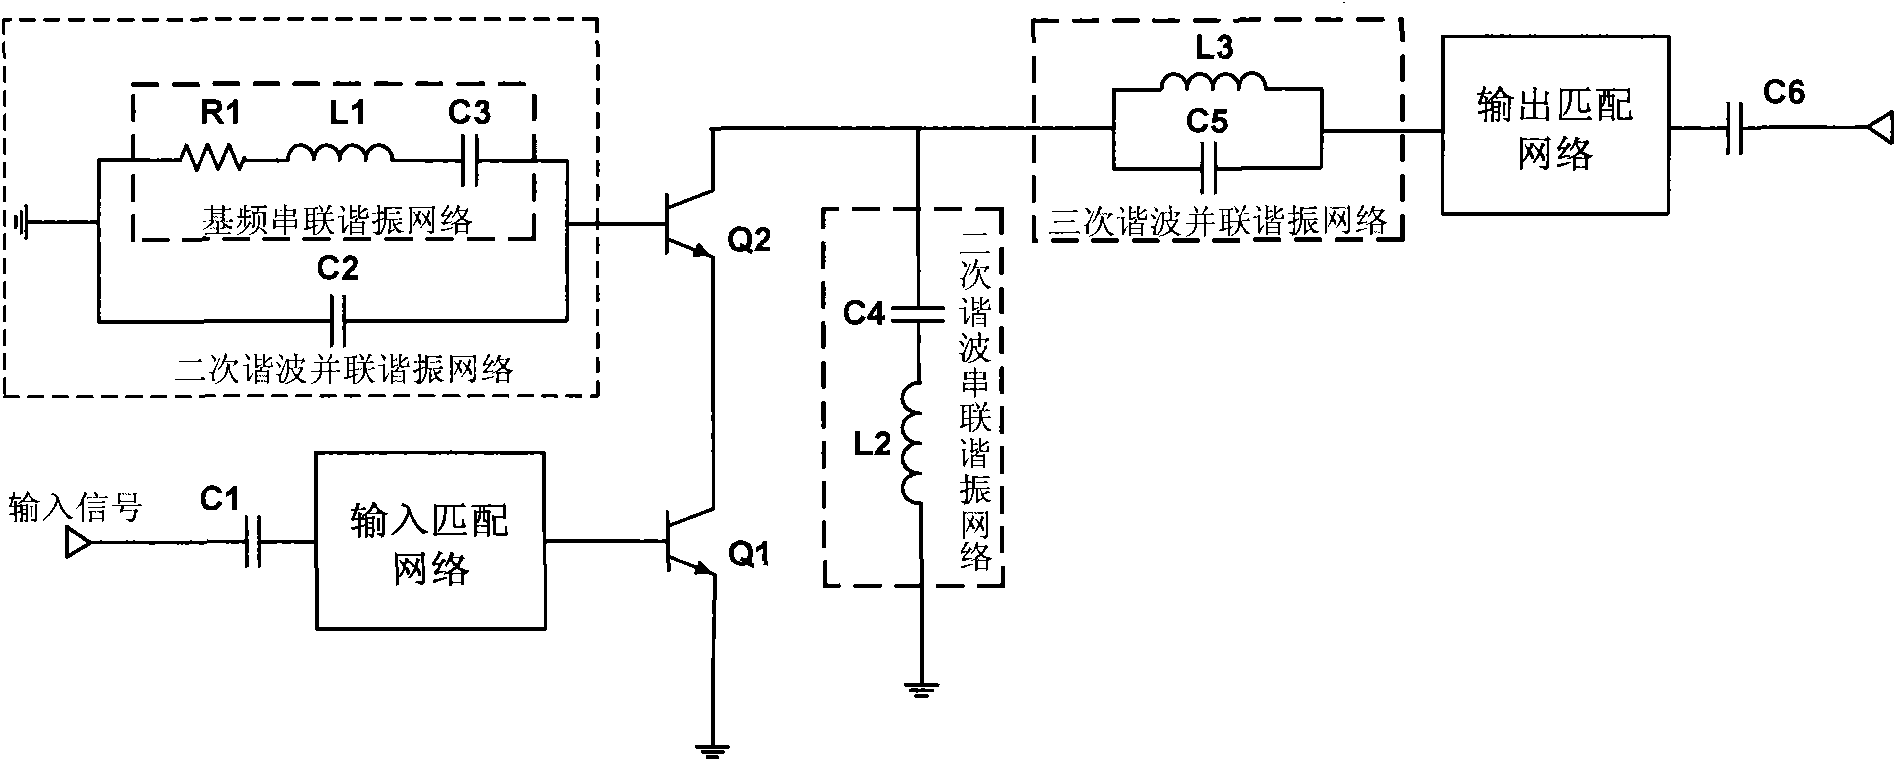 Circuit structure capable of increasing linearity and power added efficiency of power amplifier